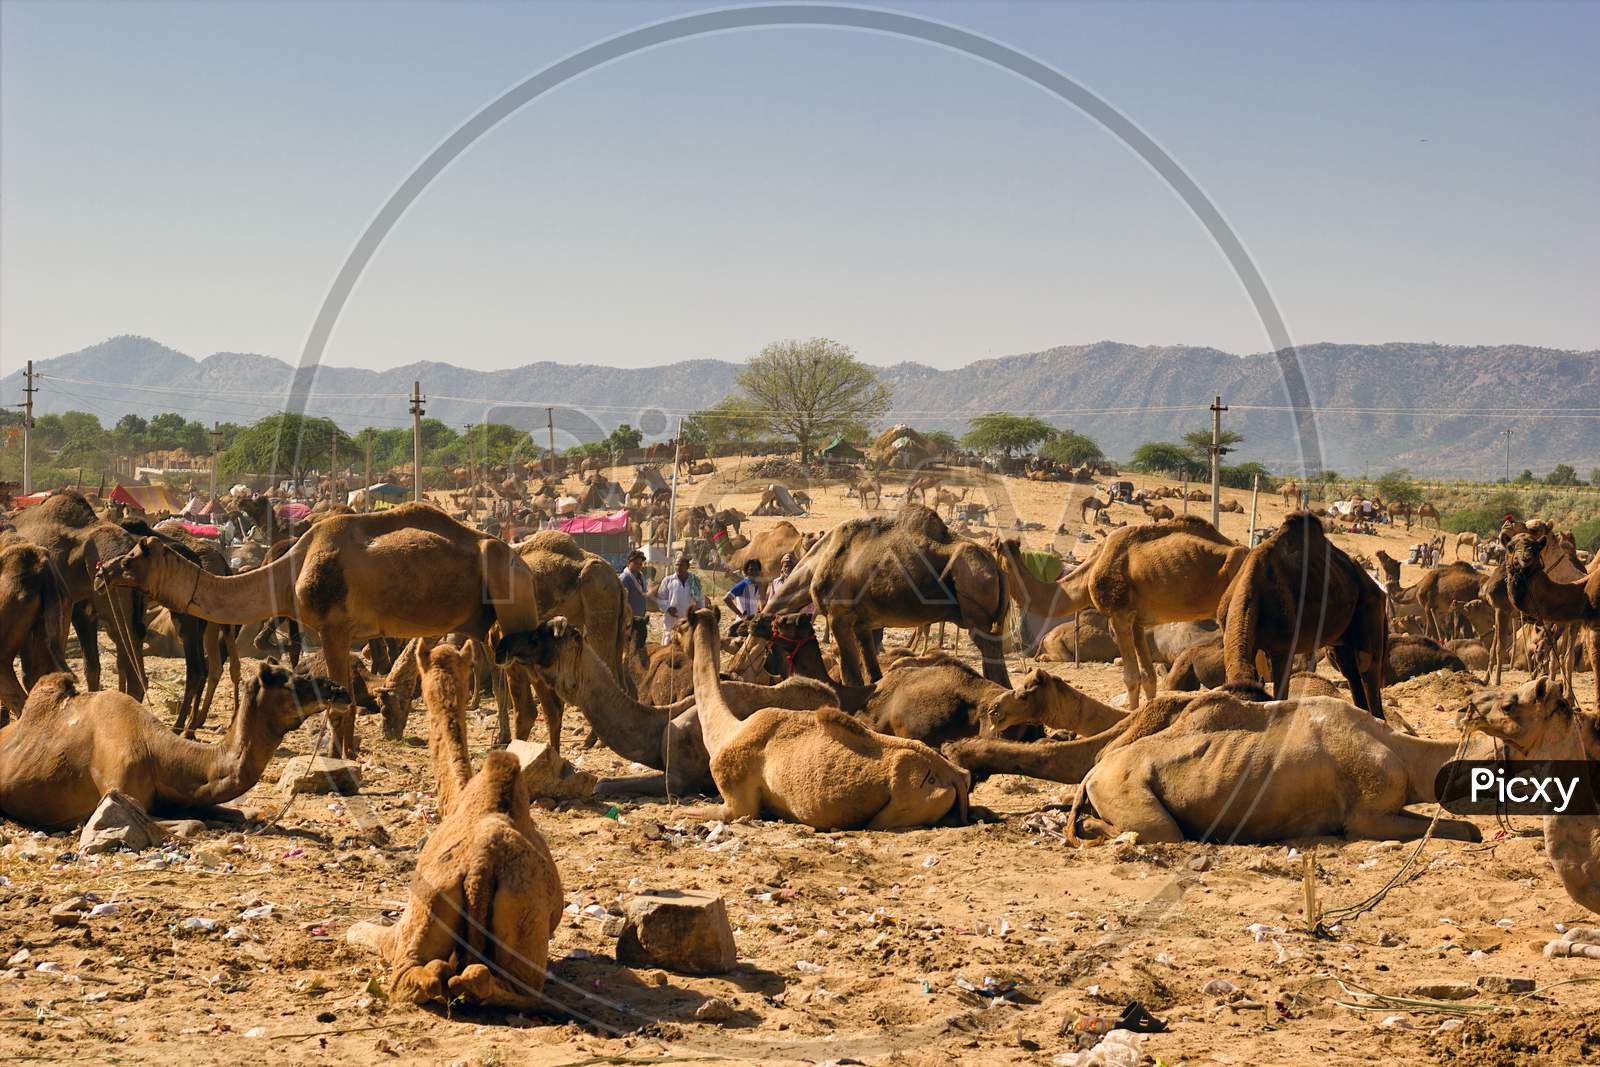 Pushkar, India - November 10, 2016: Bunch Of Camels Sitting On A Desert At Pushkar Camel Festival As A Part Of Trade. India'S Largest Camel, Horse And Cattle Fairs In The State Of Rajasthan